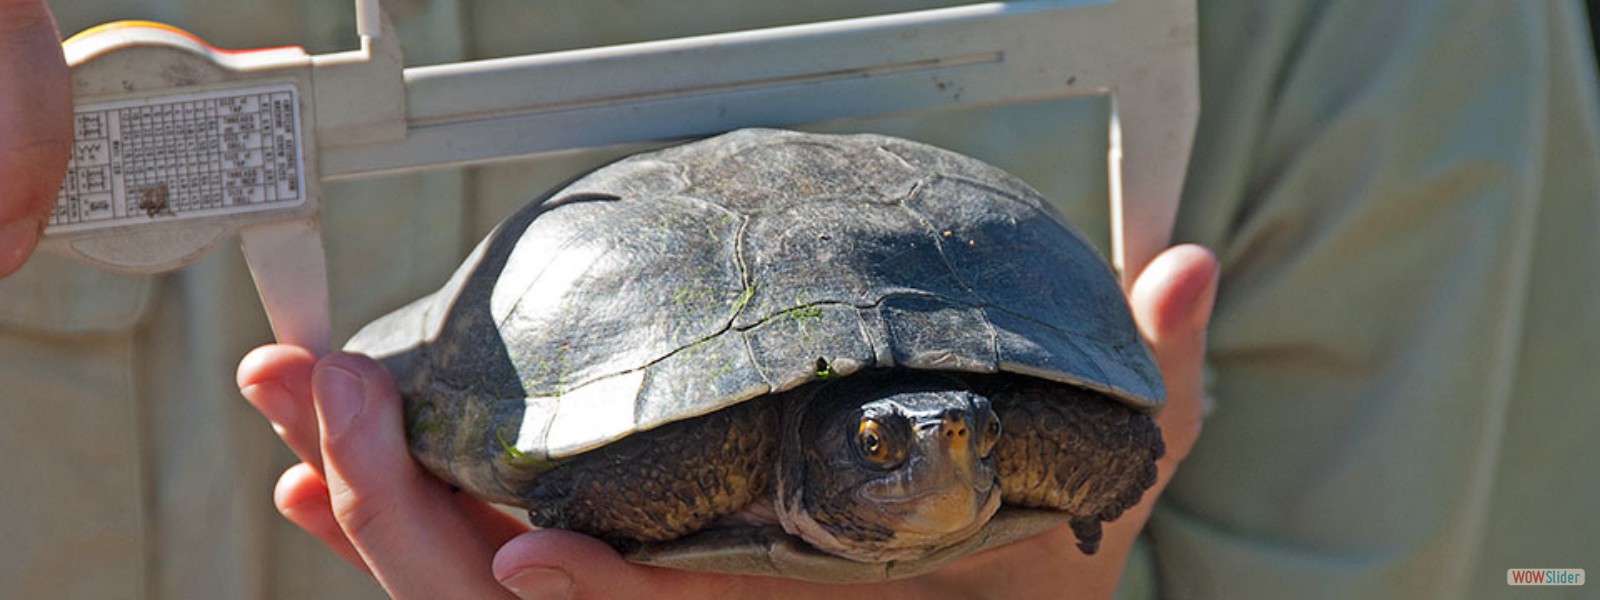 USGS Scientist Kathy Baumberger measures the carapace of a Western Pond Turtle